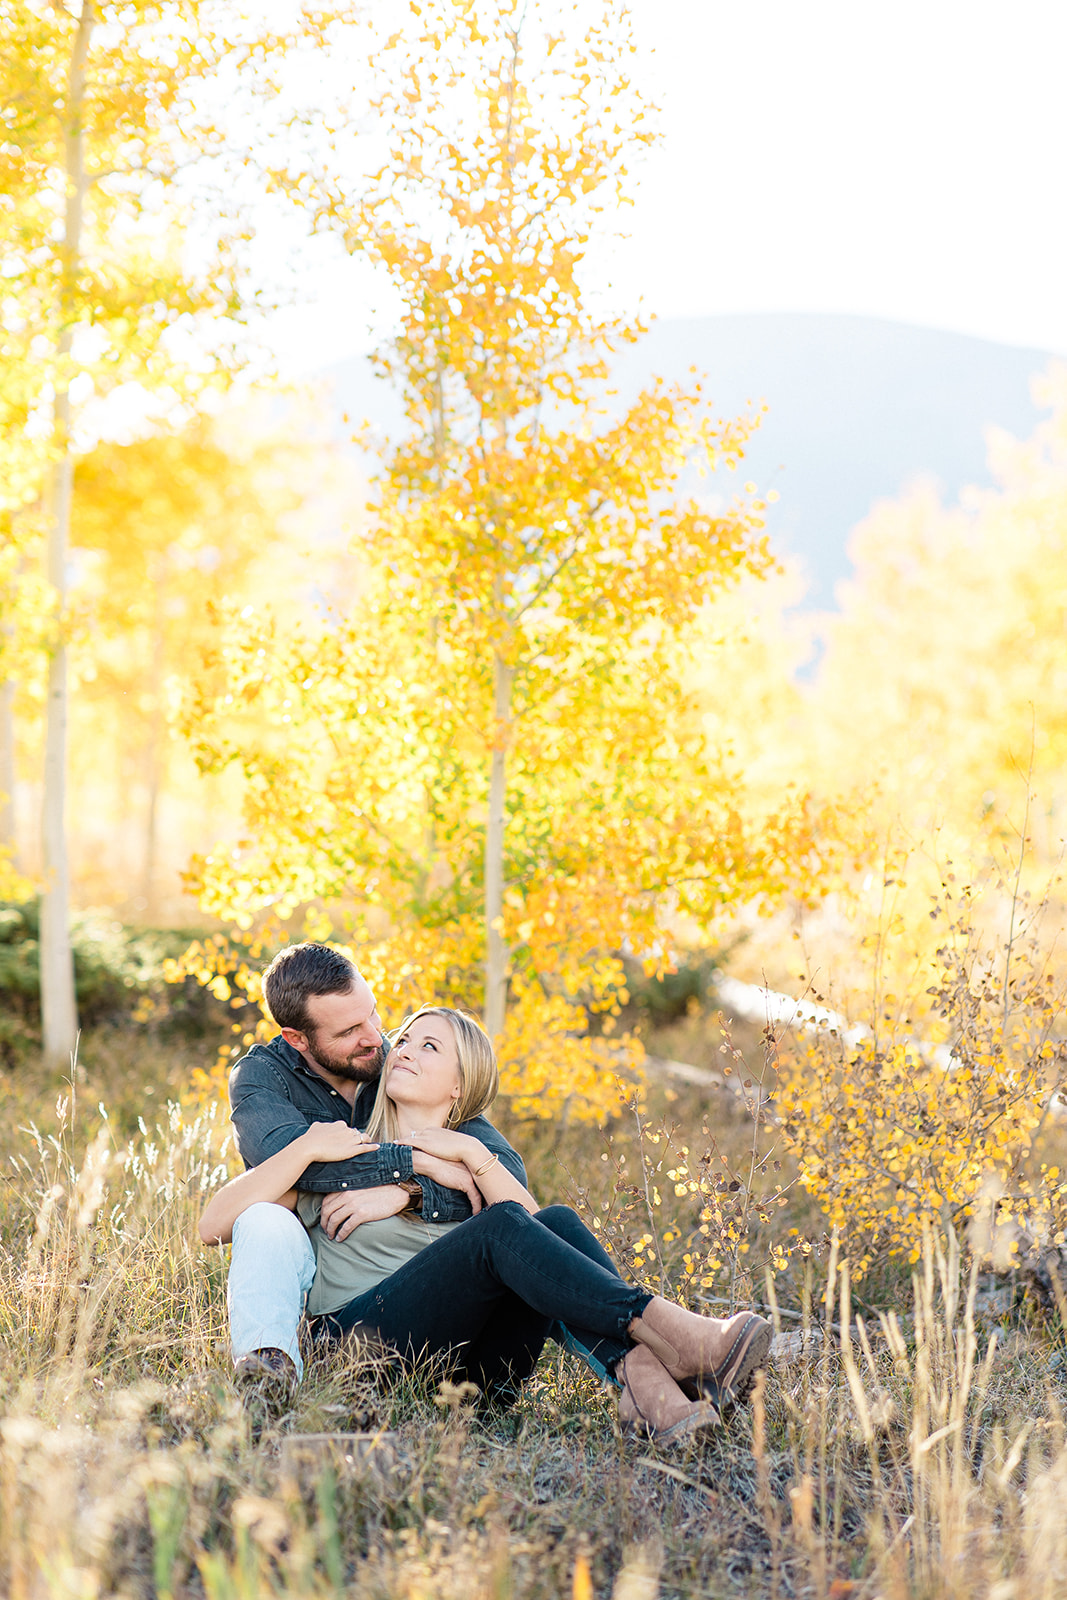 Couple in Colorado Fall color mountain setting engagement portrait